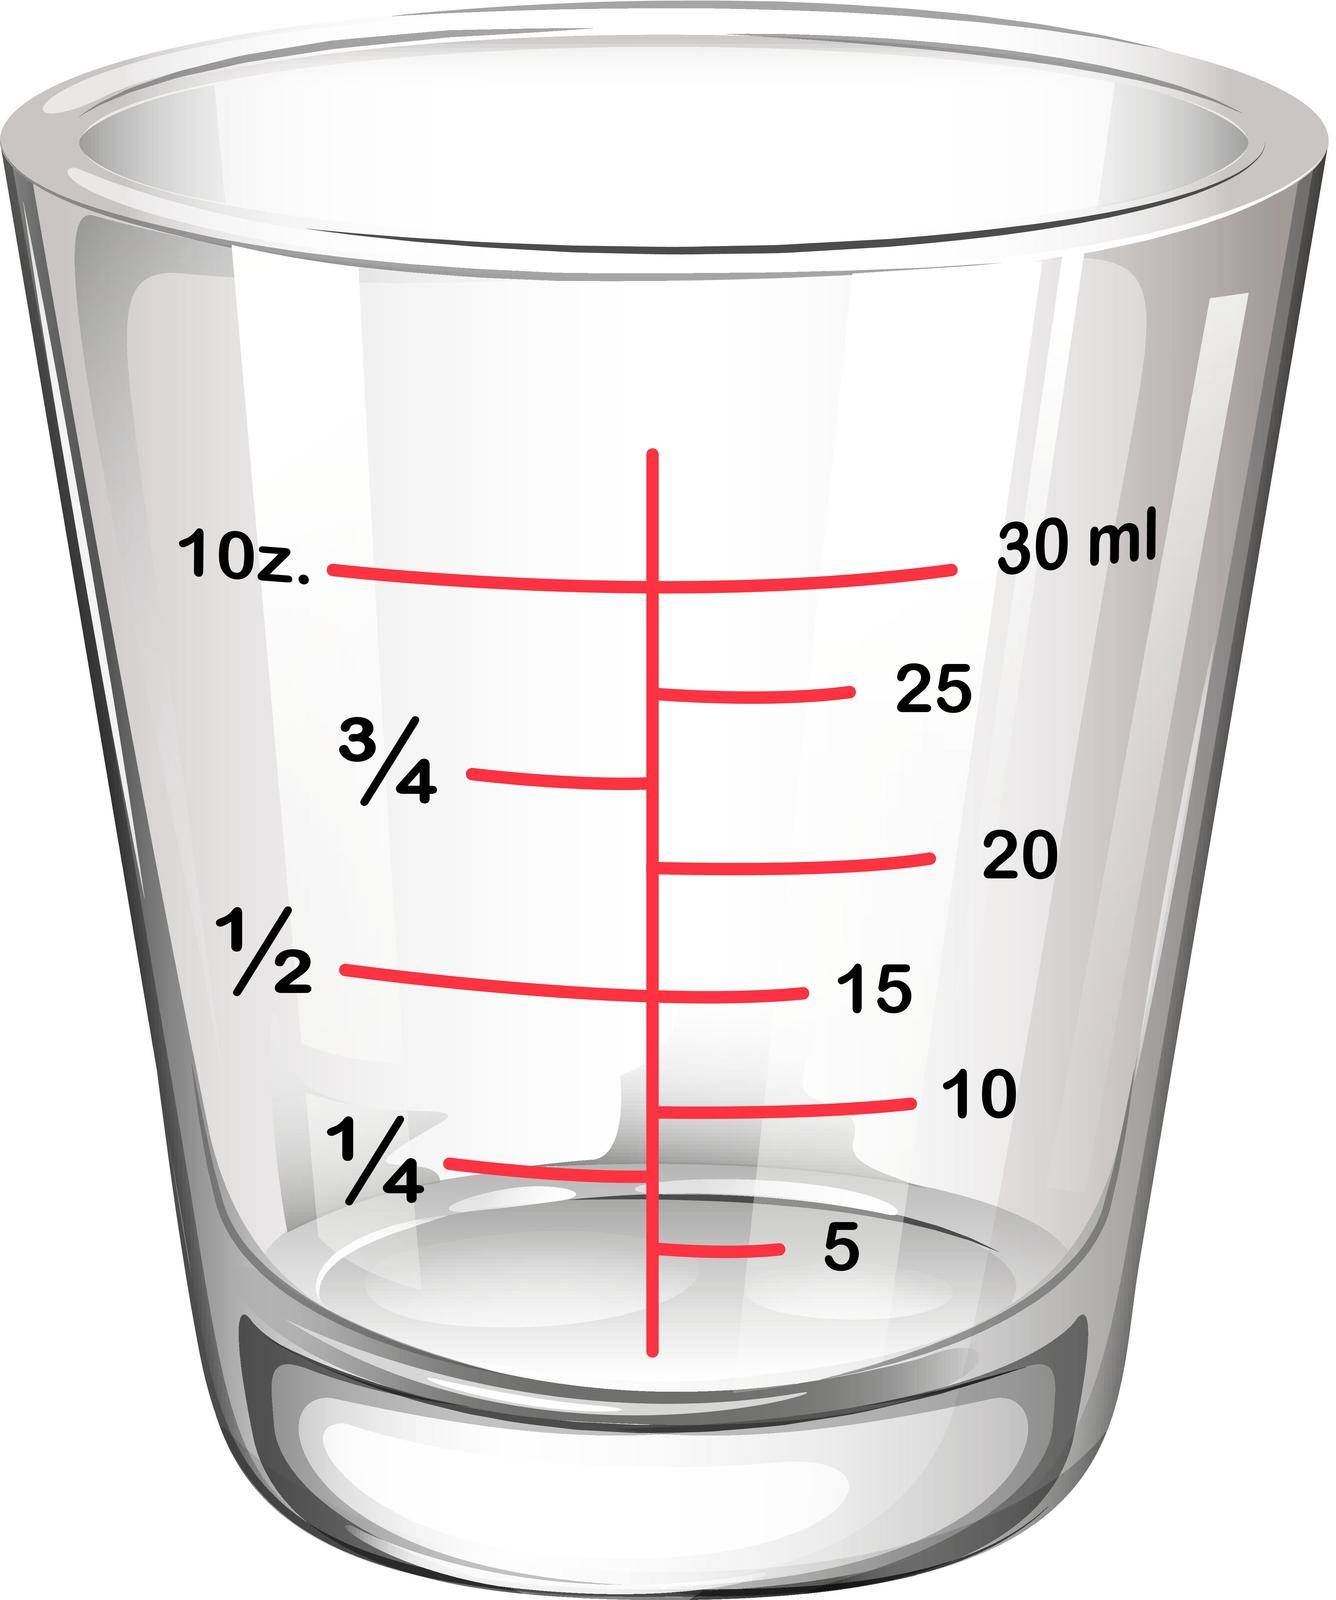 Illustration of a measuring glass on a white background